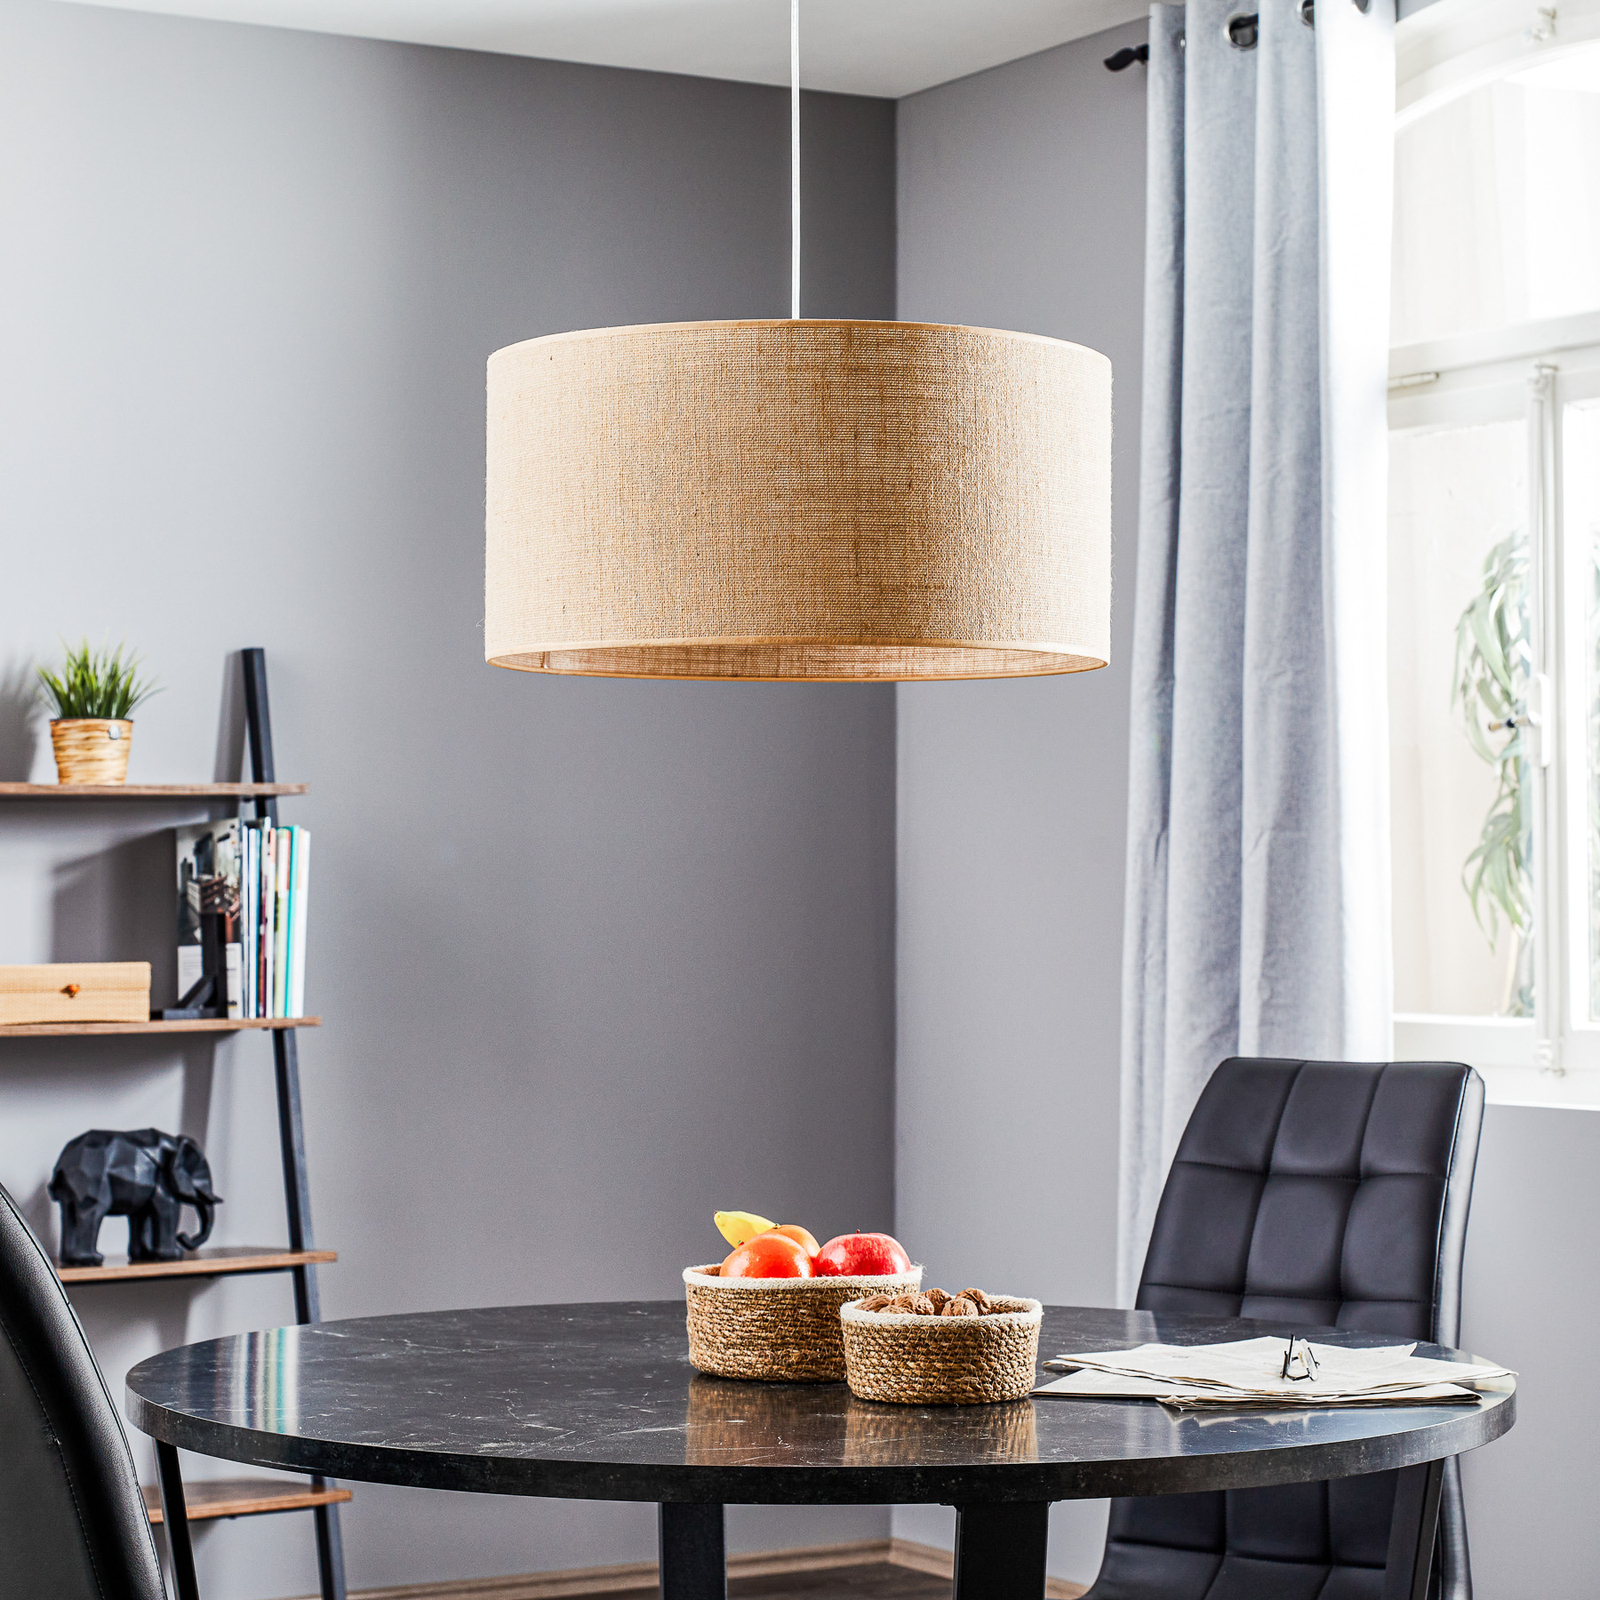 Jute pendant light with a round jute lampshade